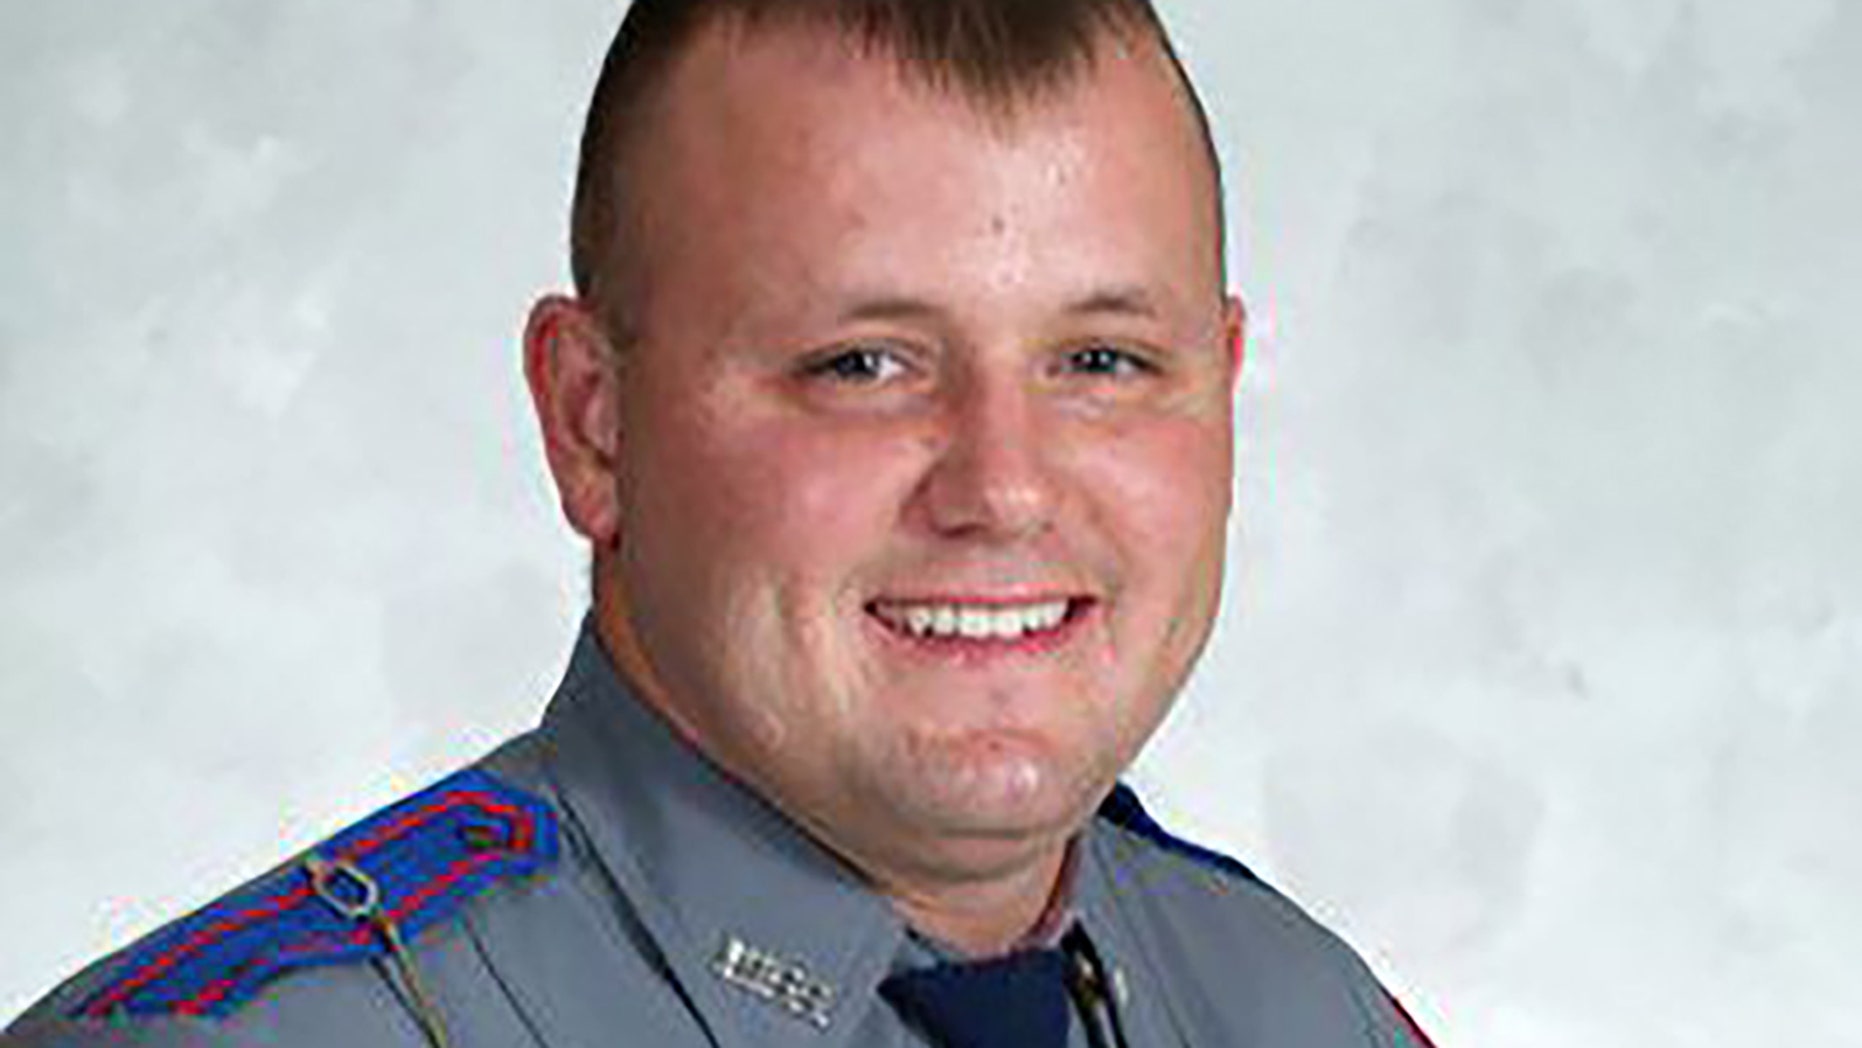 Officer Kenneth Smith was shot and killed Sunday.